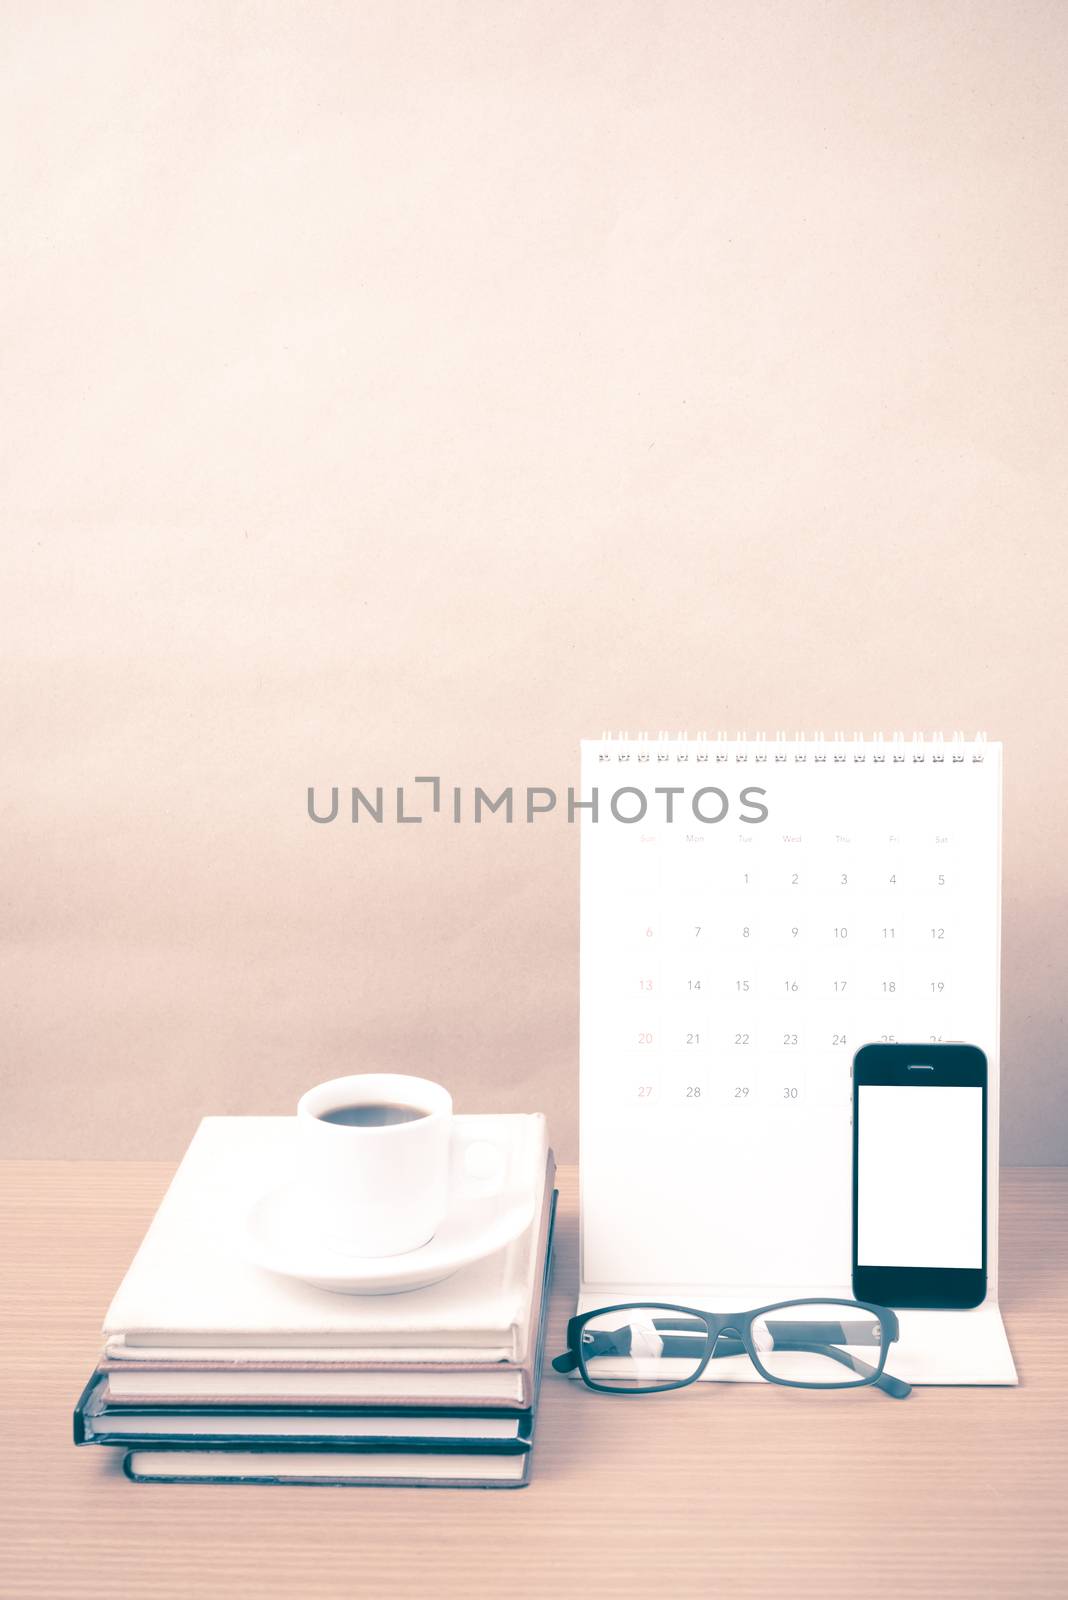 coffee,phone,eyeglasses,stack of book and calendar on wood table background vintage style